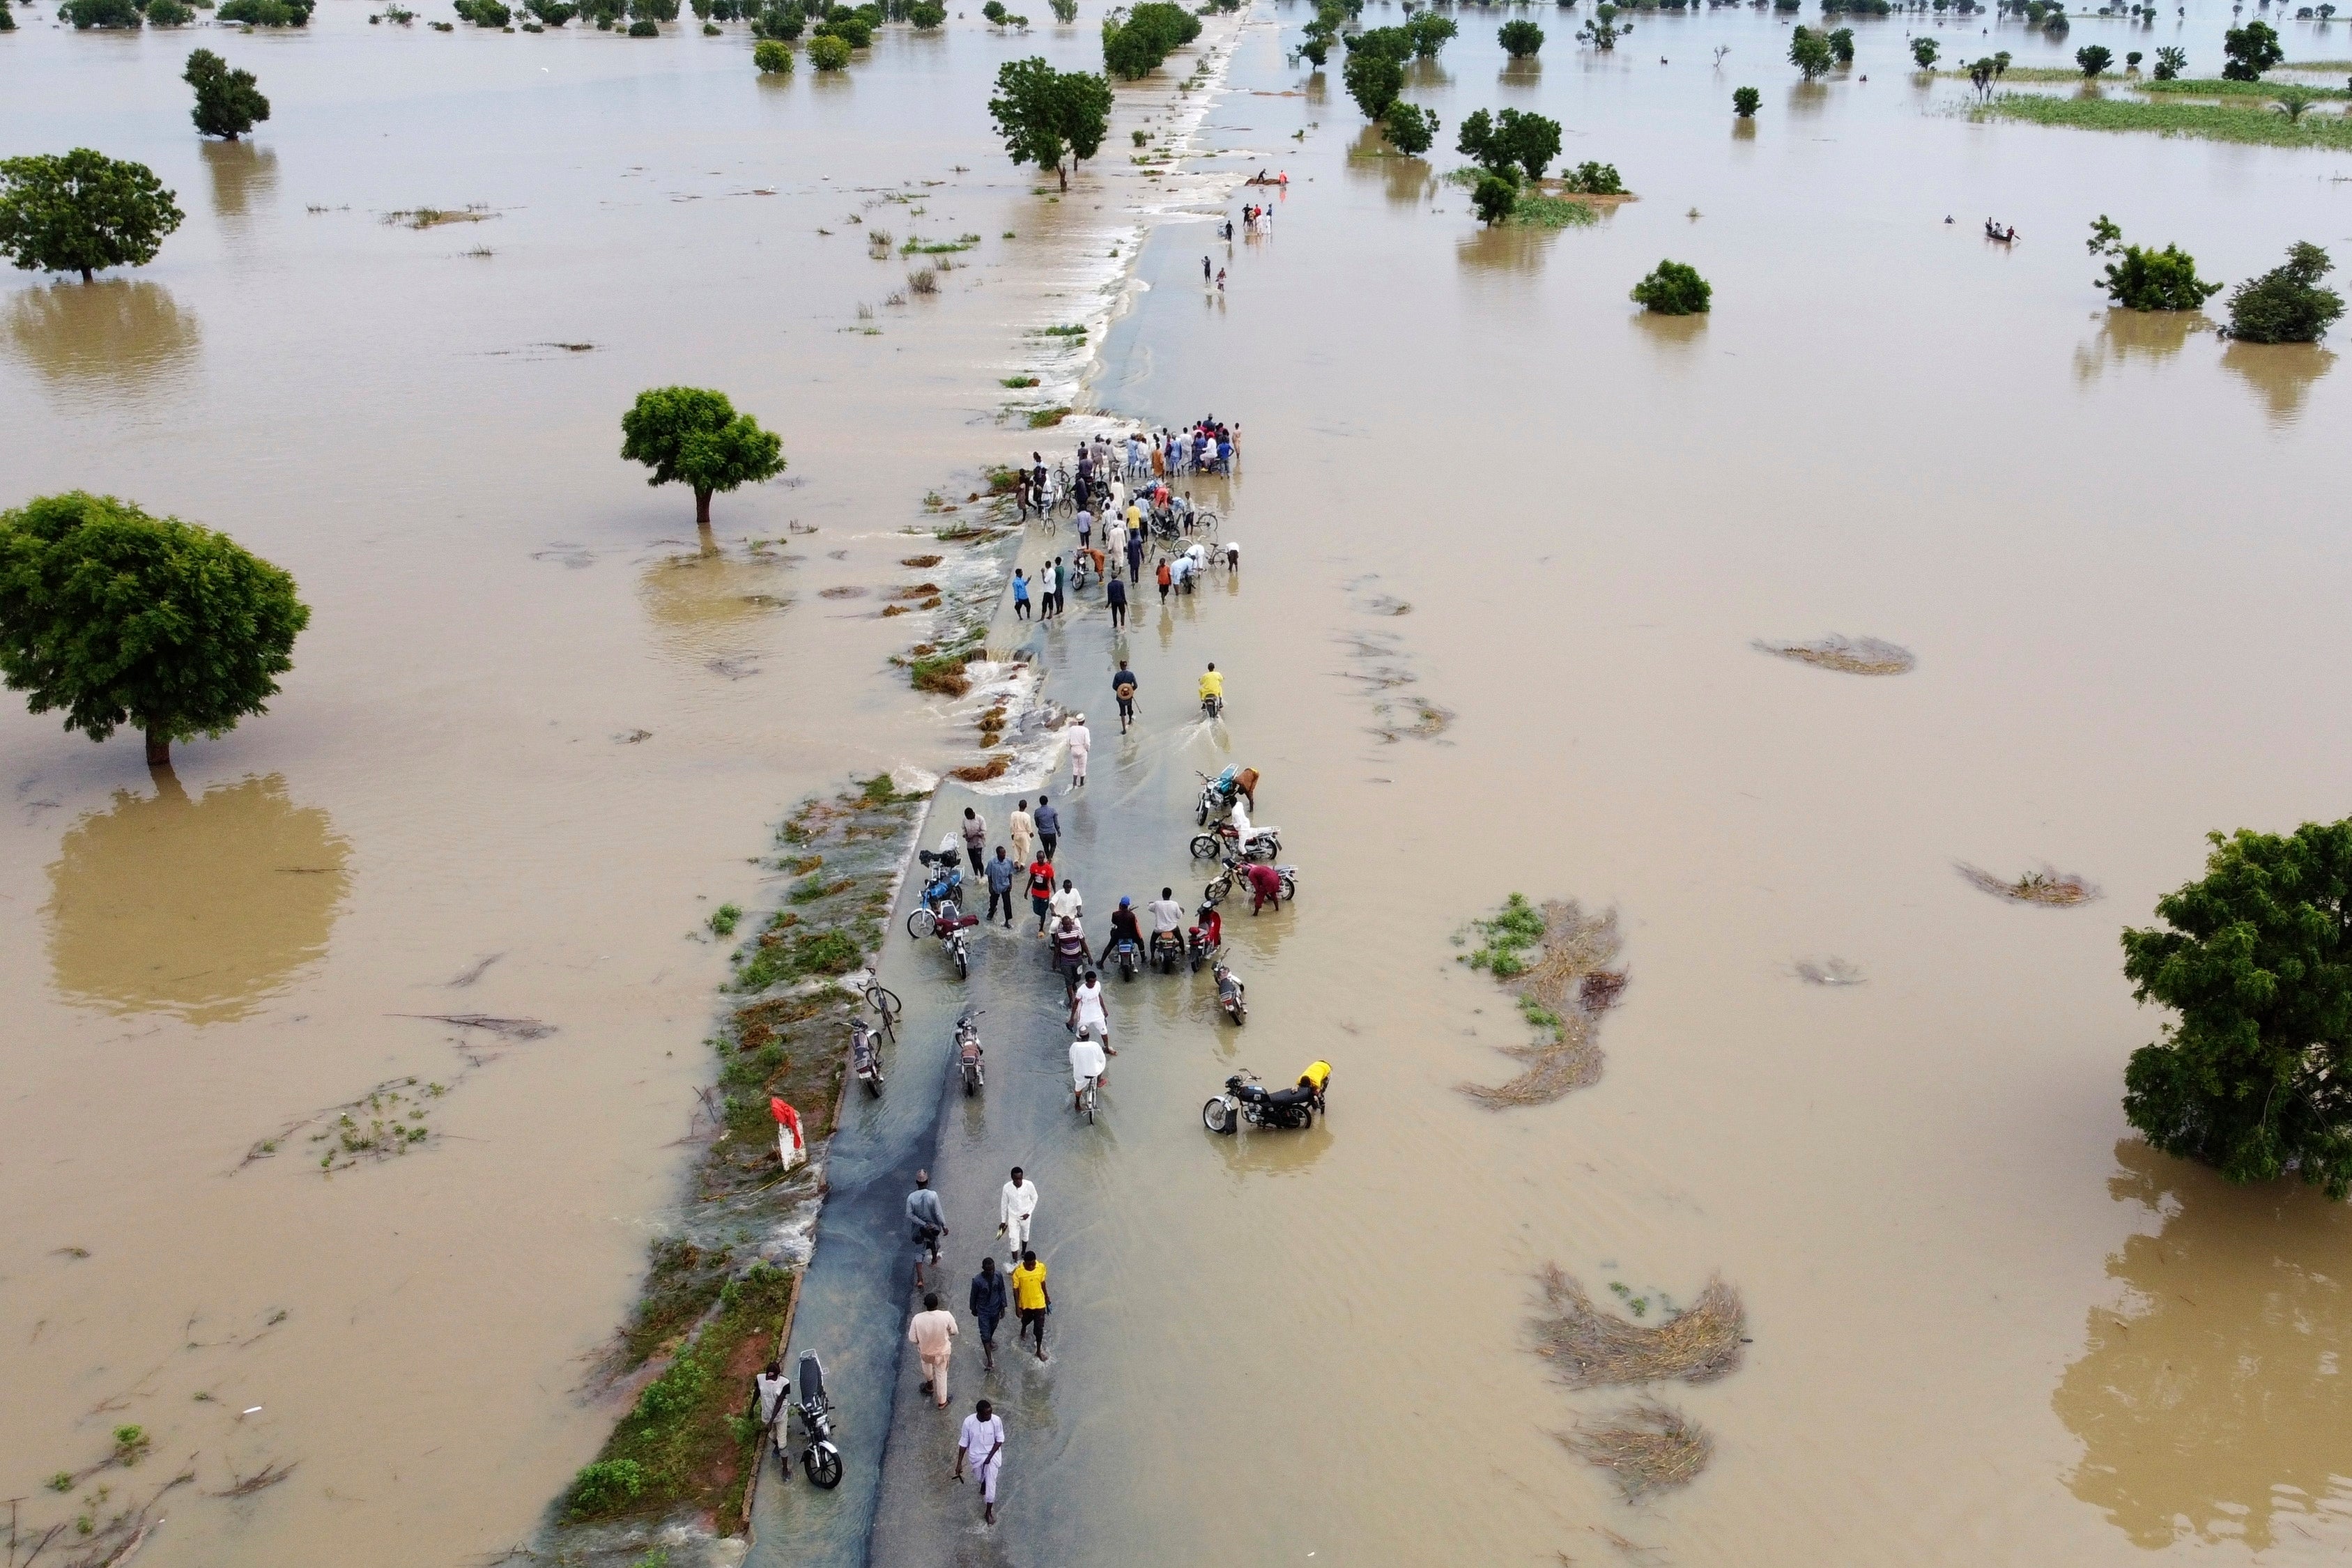 People walk through floodwaters after heavy rainfall in Hadejia, Nigeria in September 2022